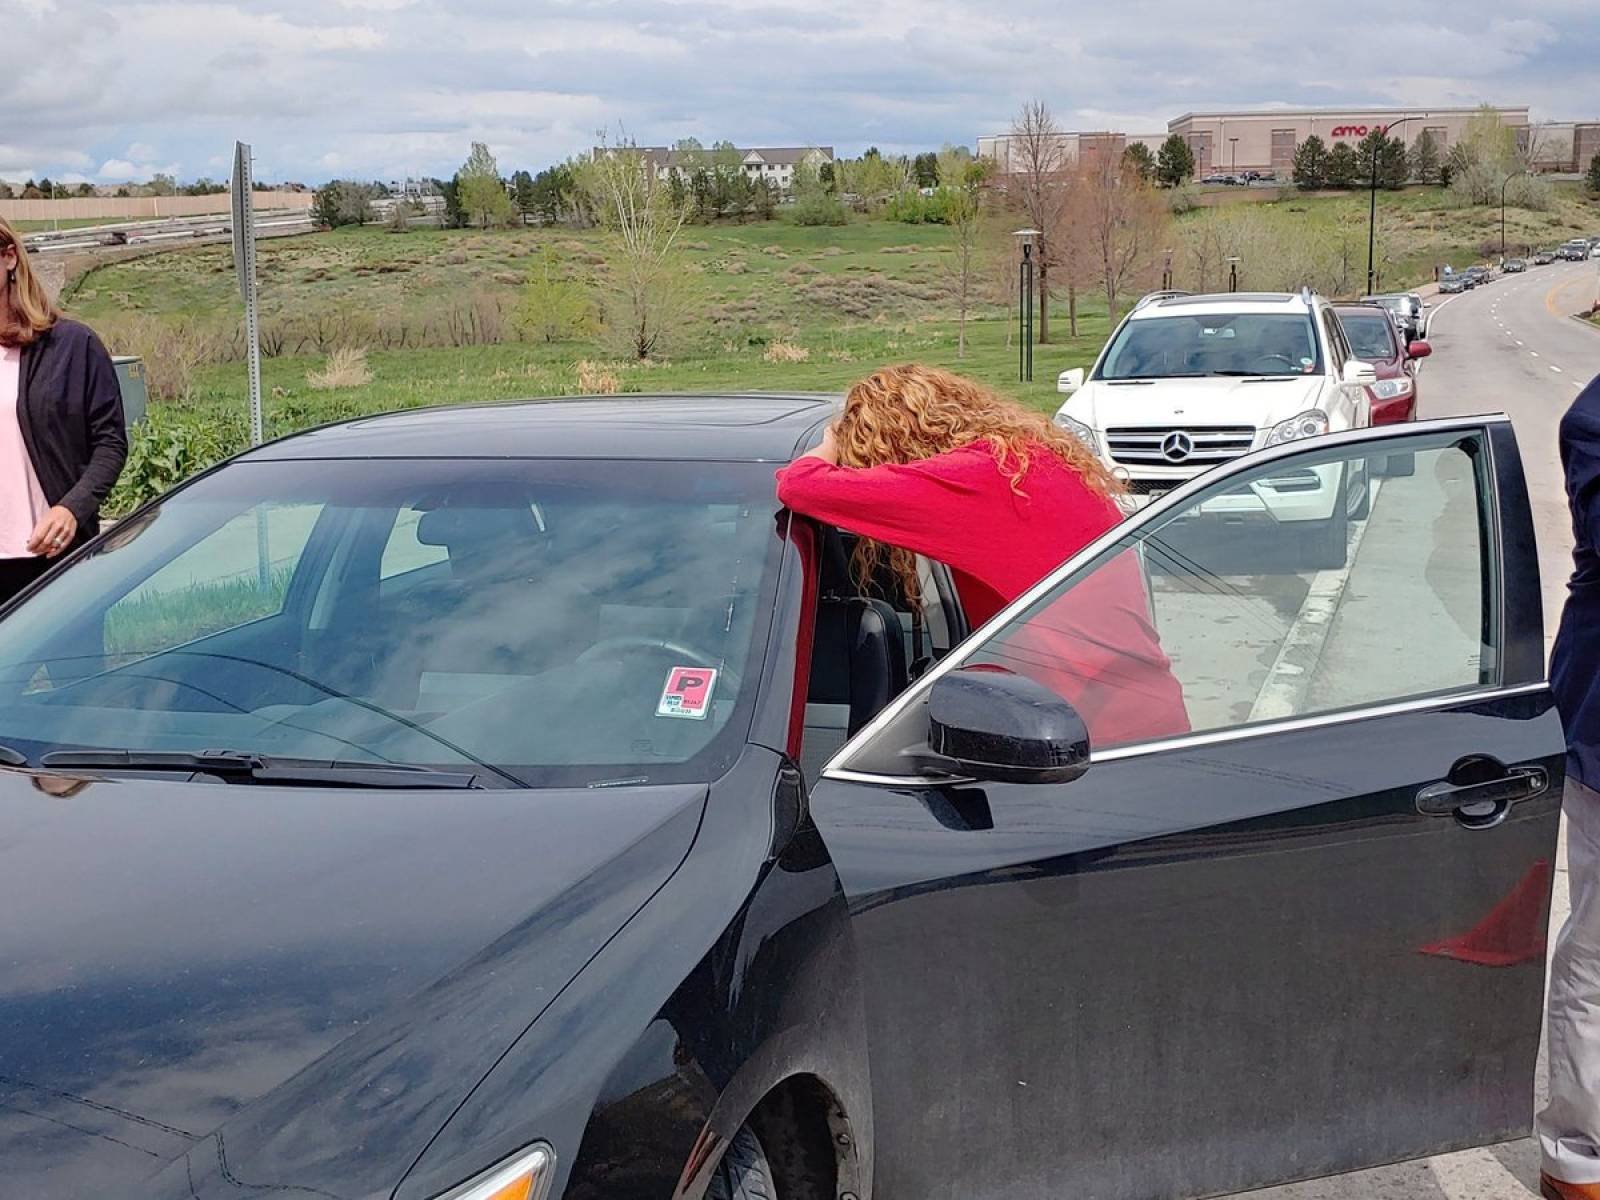 A parent reacts near the STEM School during a shooting incident in Highlands Ranch, Colorado, U.S. in this May 7, 2019 image obtained via social media